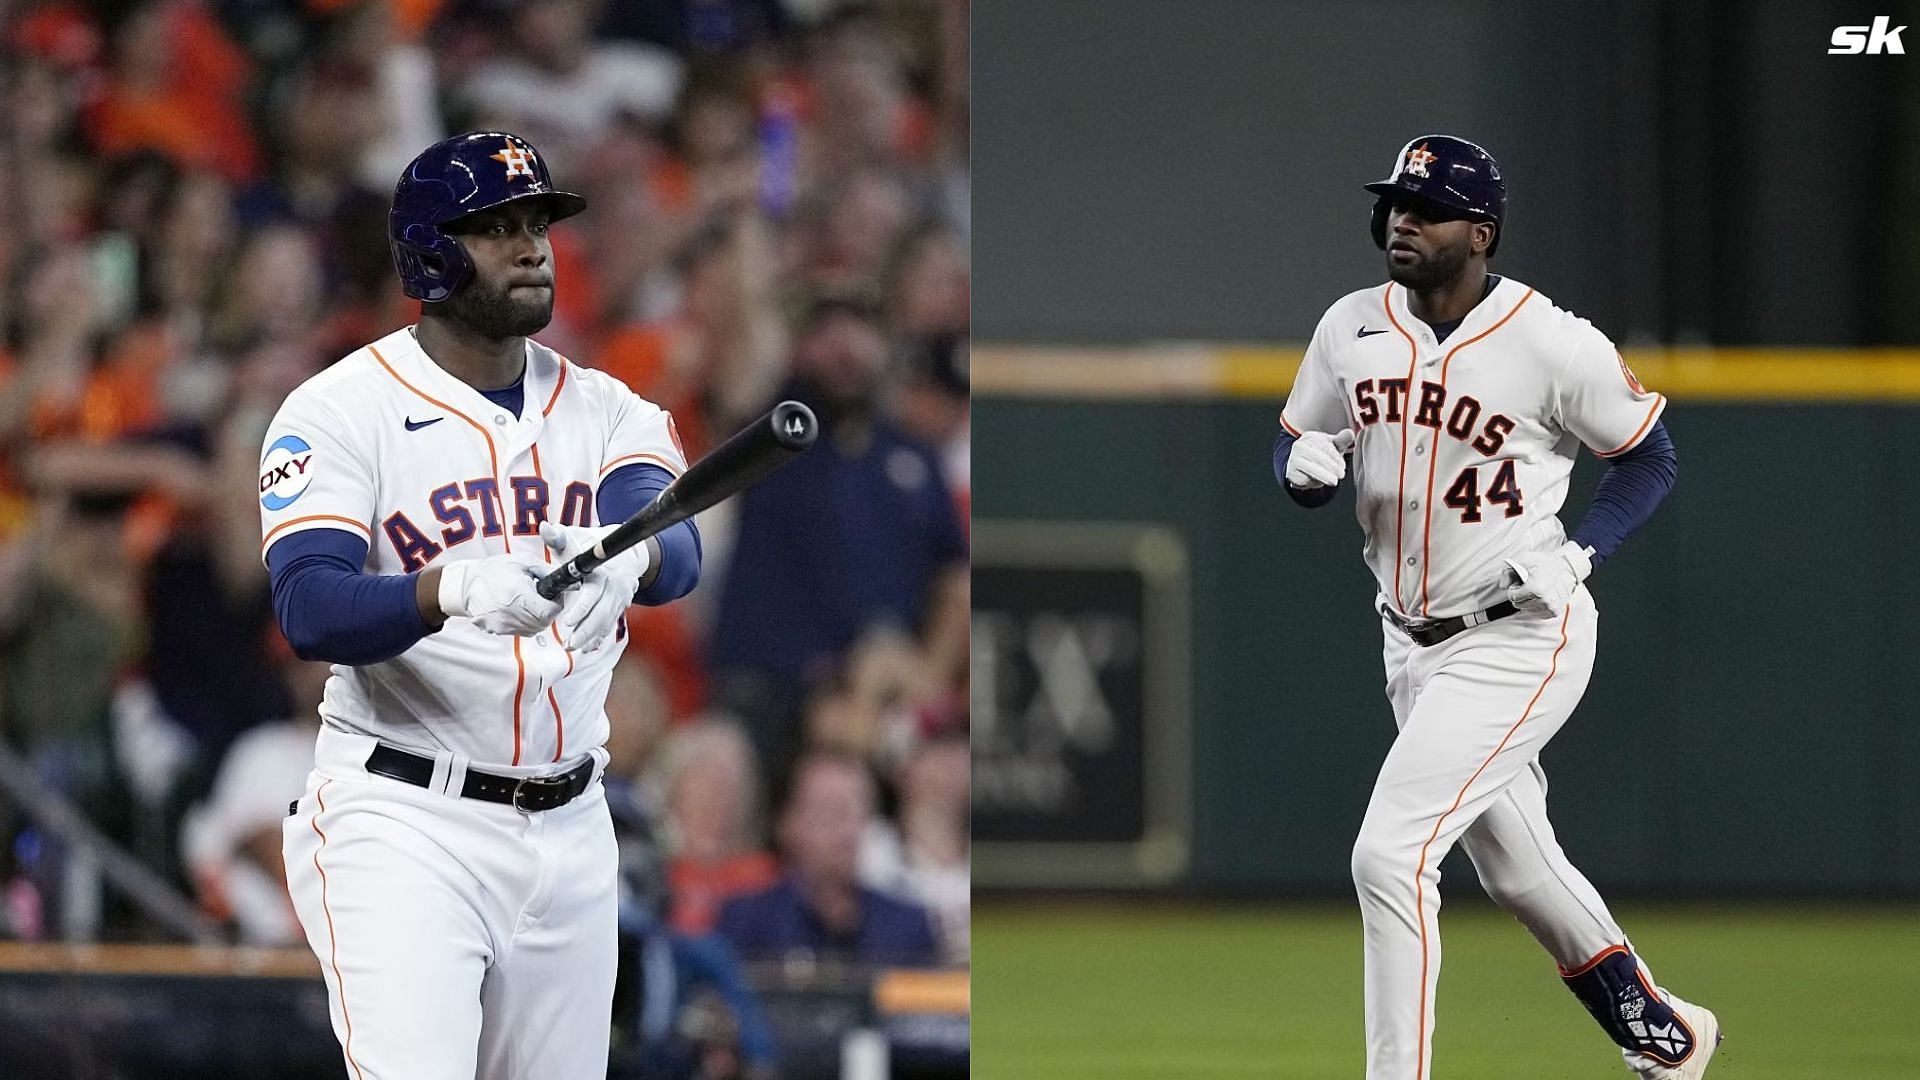 Yordan Alvarez homered twice in the game against the Minnesota Twins in game 1 of the ALDS.